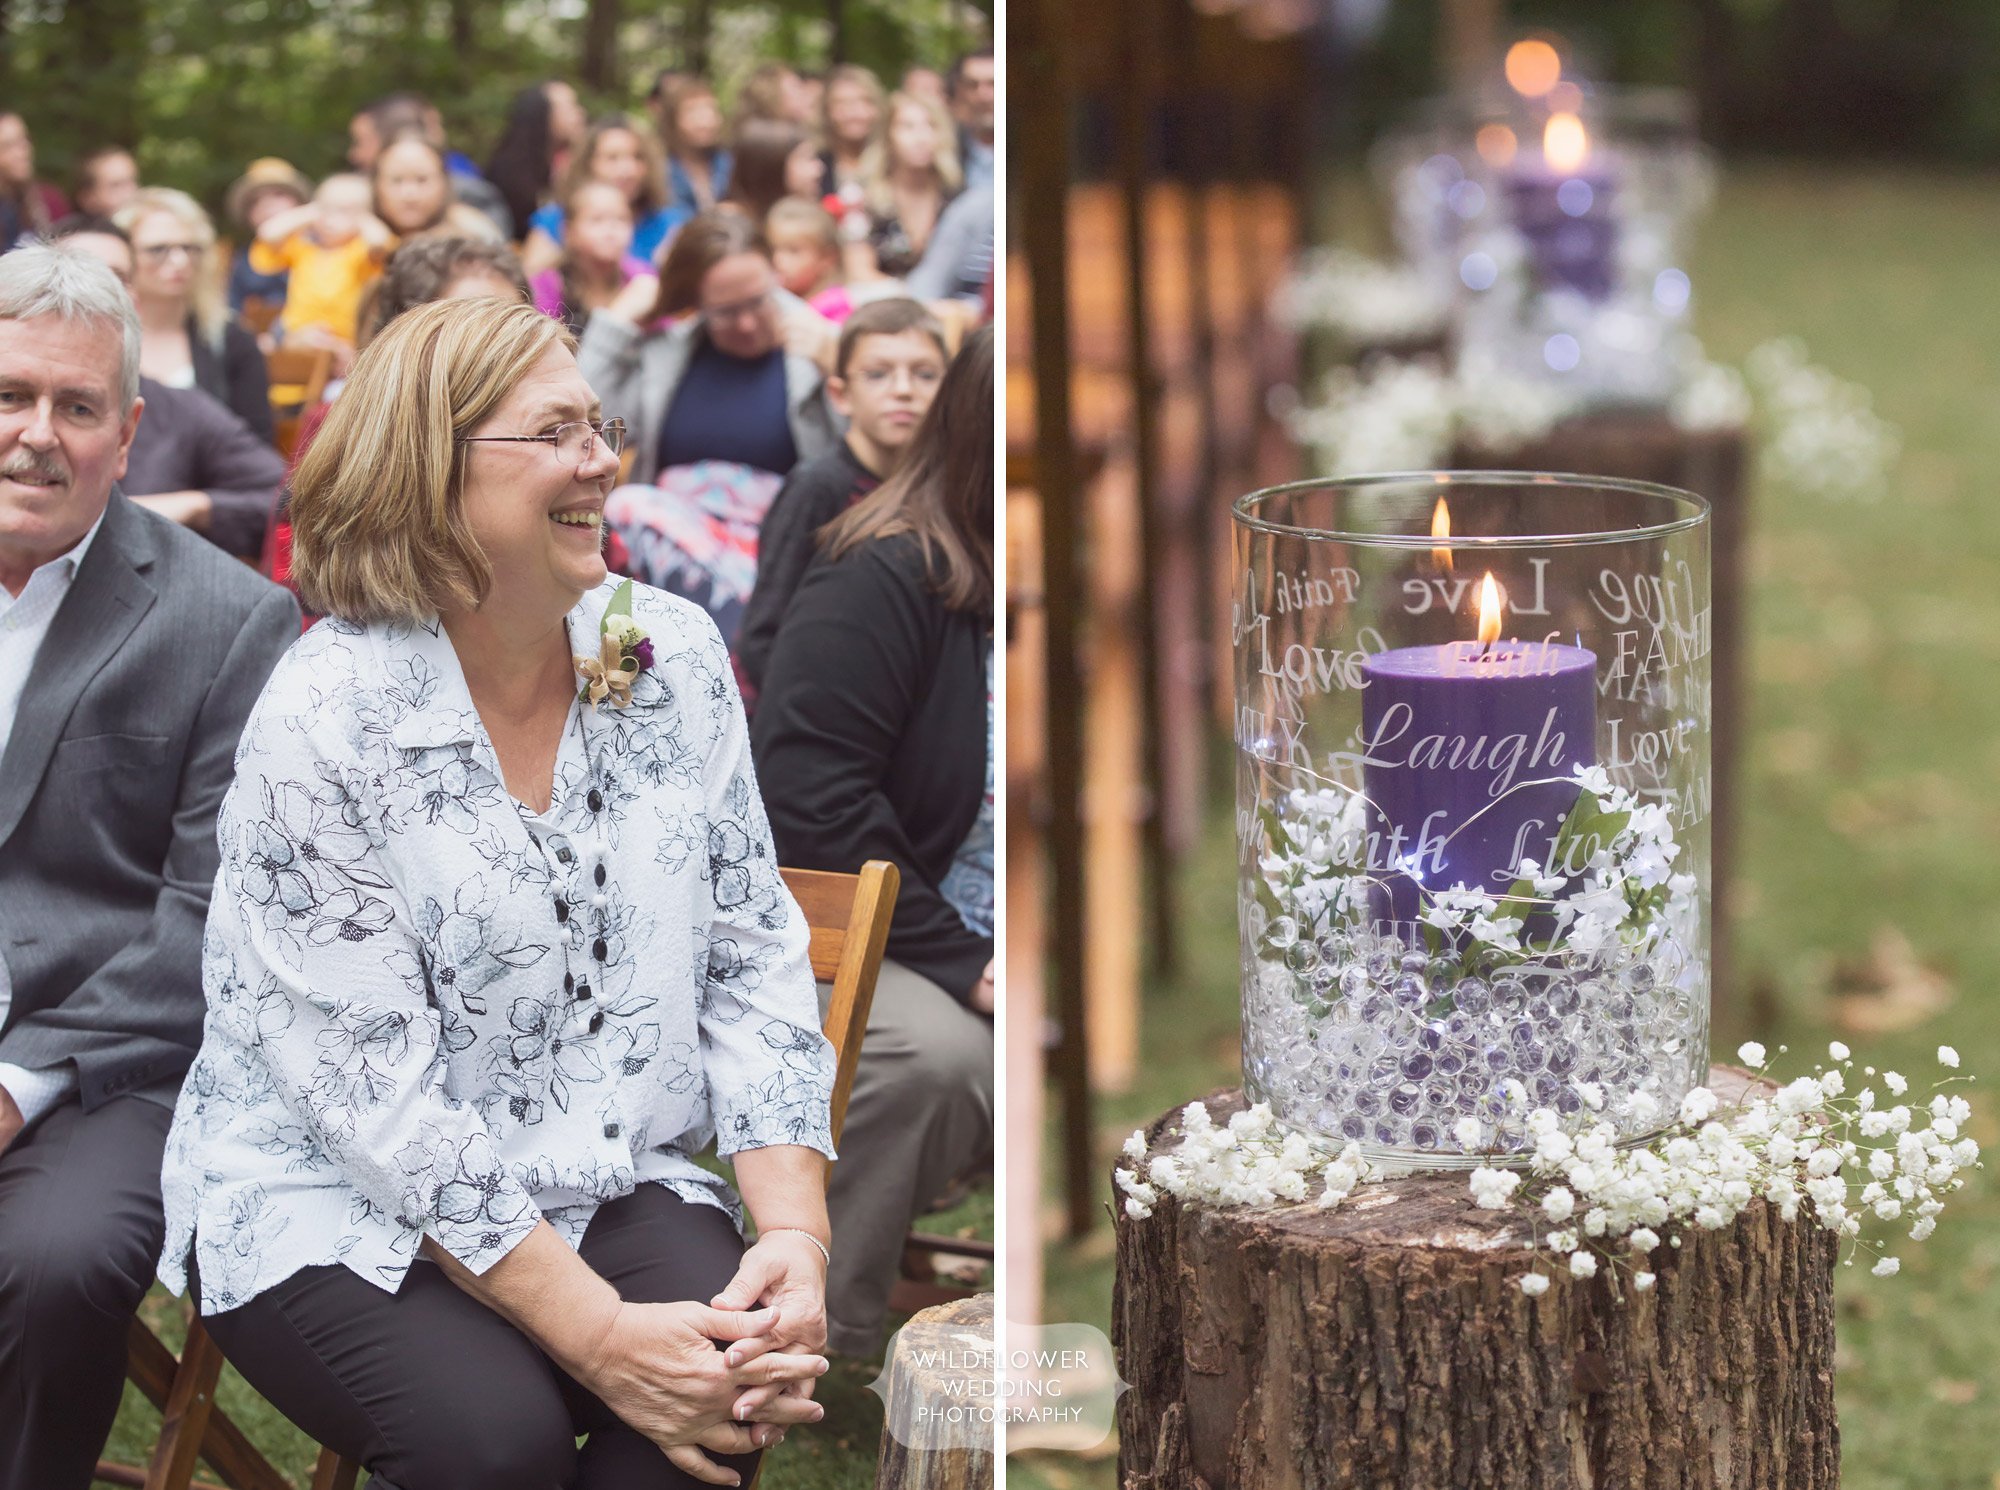 These tree stumps with candles are simple rustic wedding decor ideas.